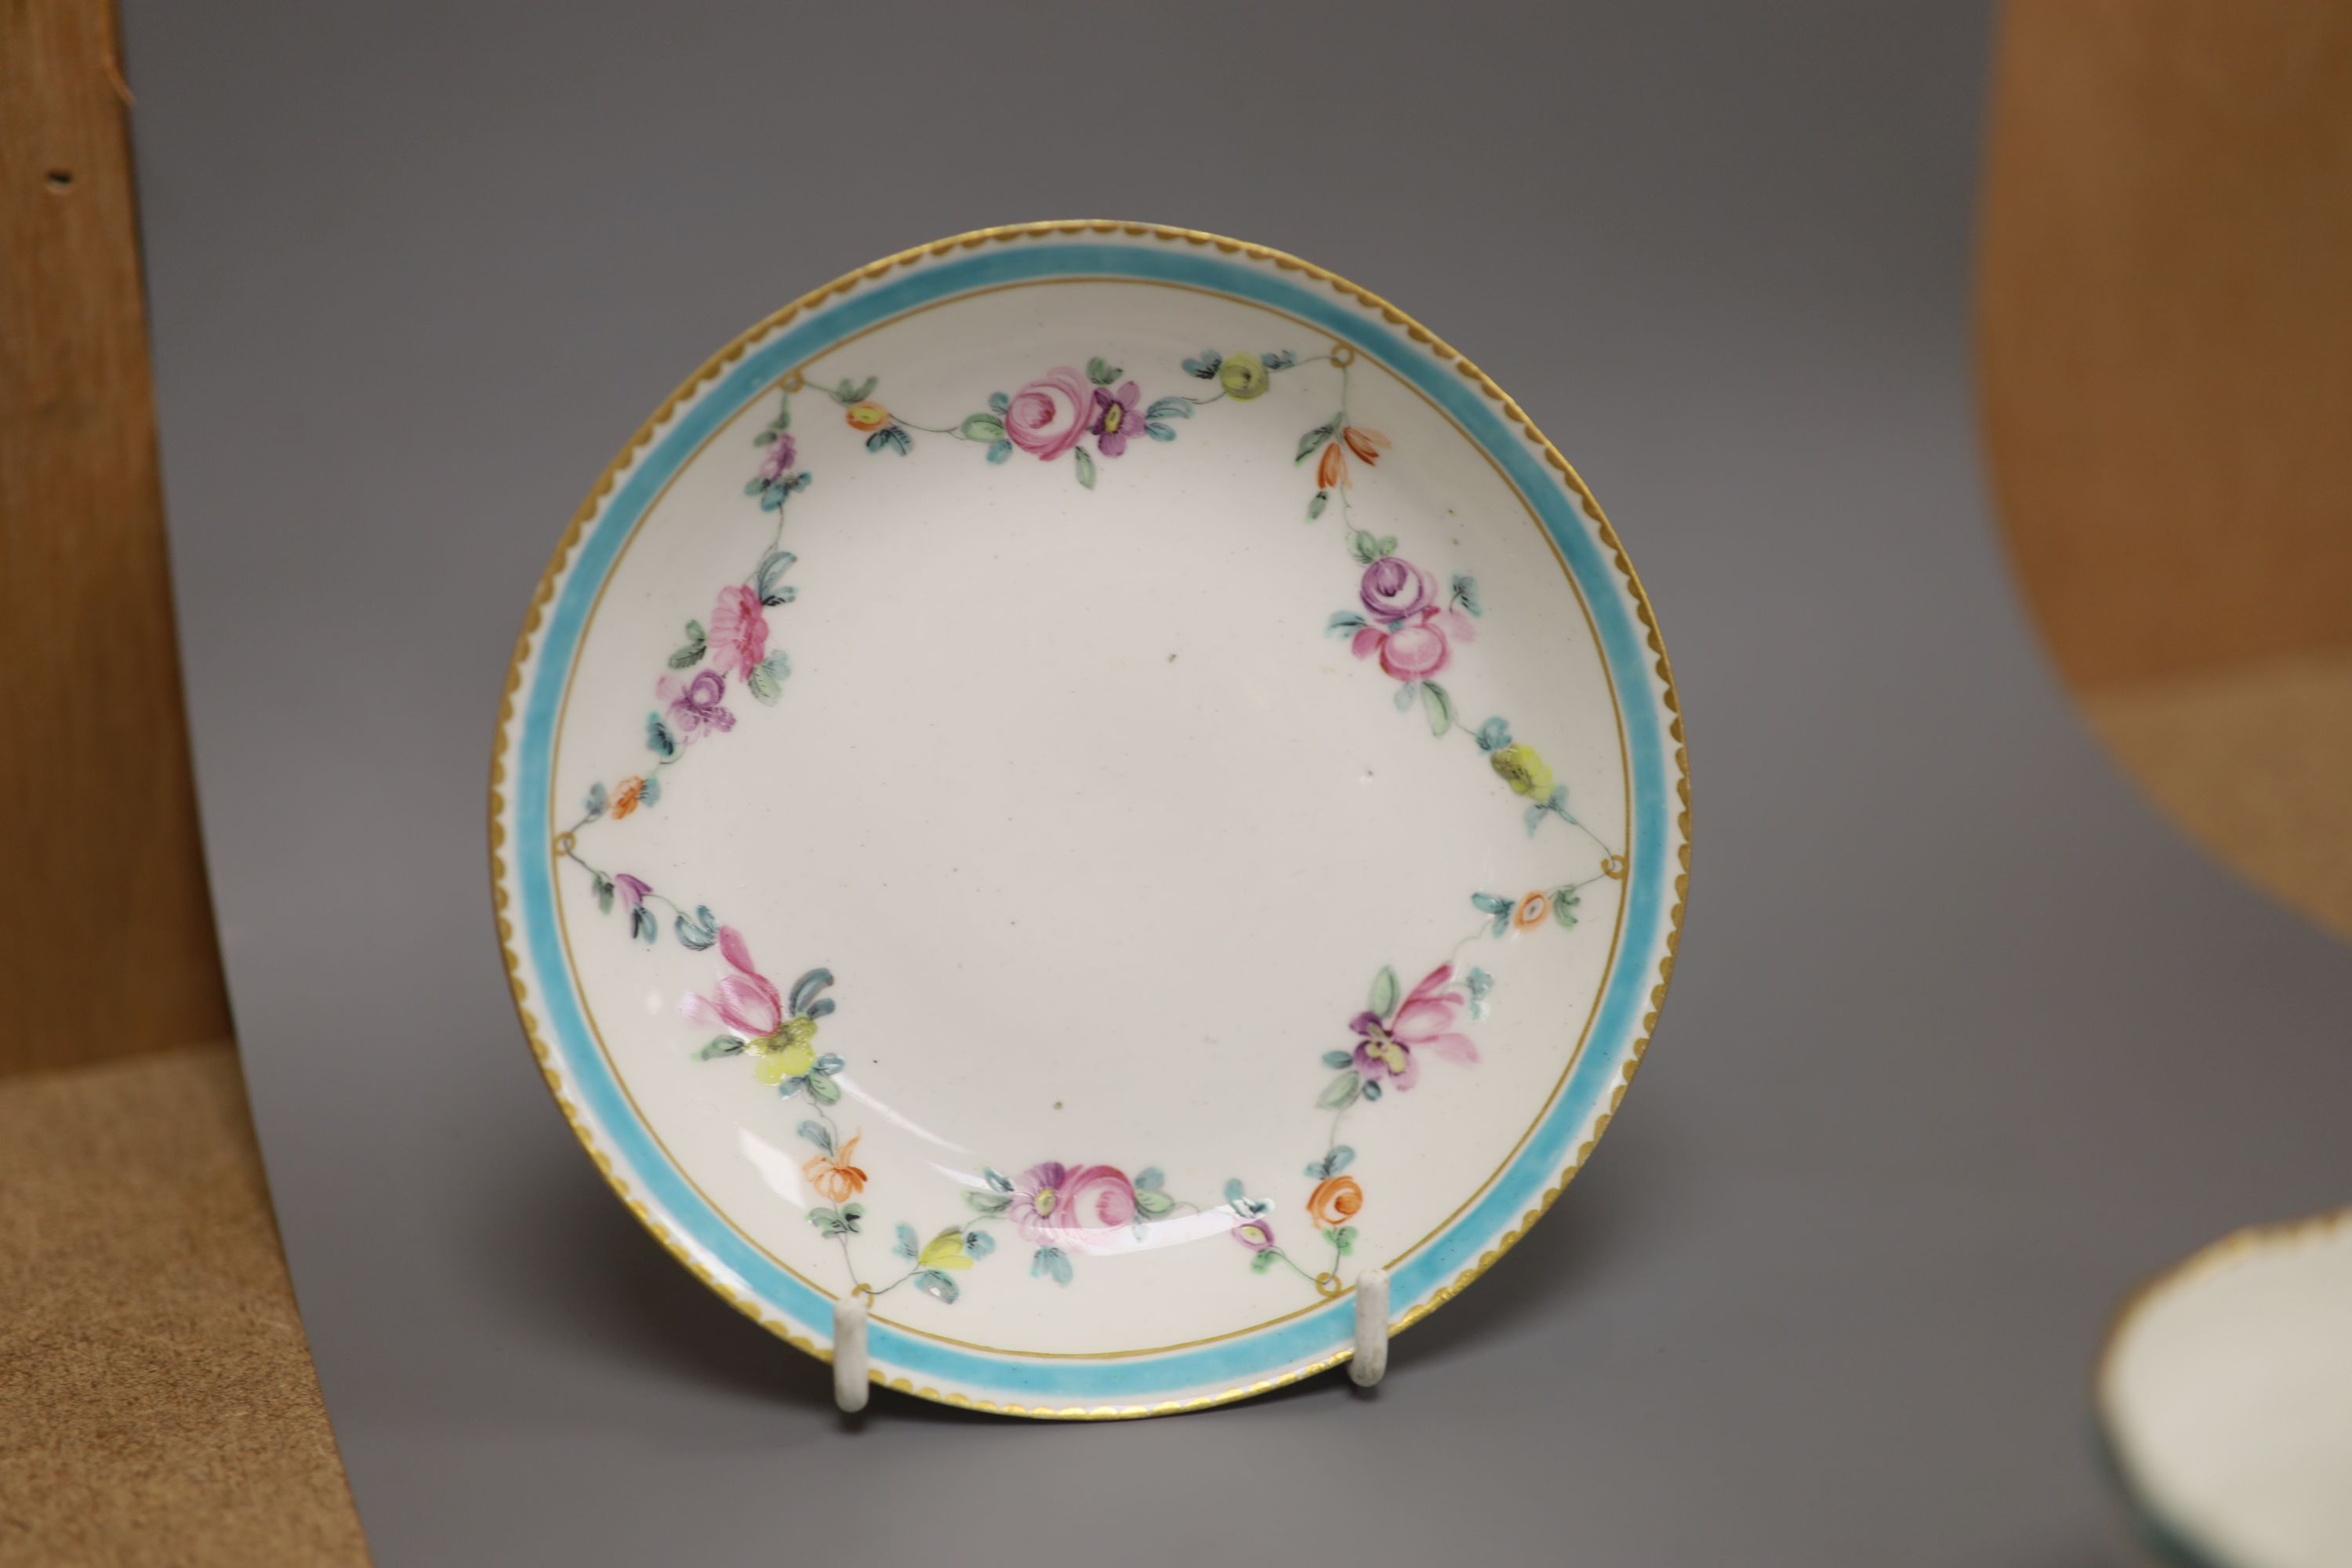 A Chelsea Derby teabowl and saucer painted with flowers, c.1778, blue Crown Derby mark with no batons, diameter 13cm